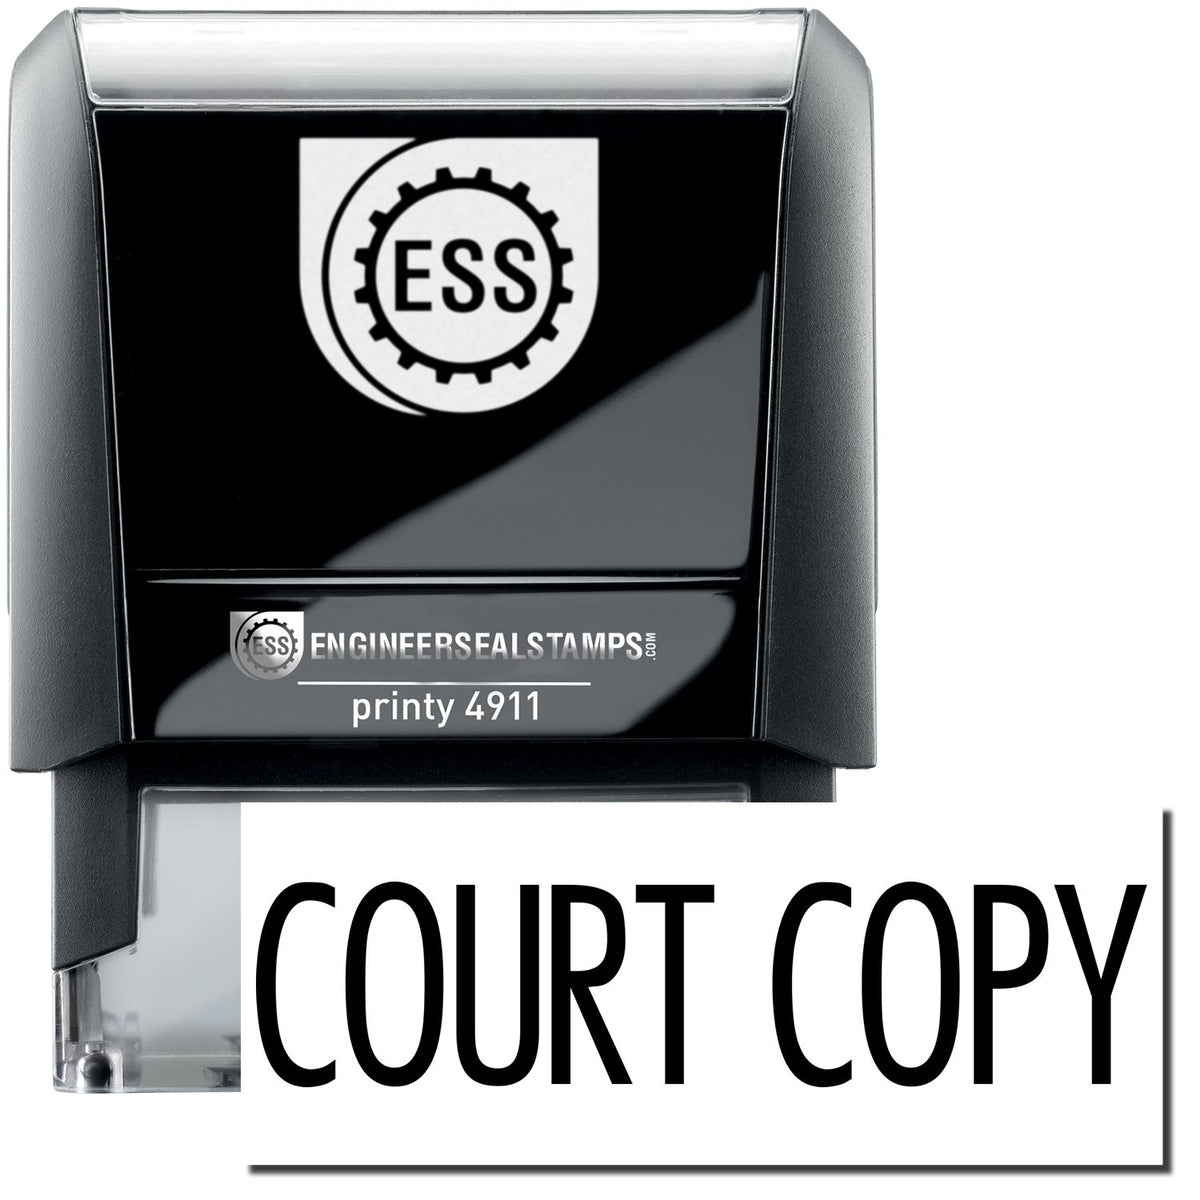 A self-inking stamp with a stamped image showing how the text &quot;COURT COPY&quot; in a narrow font is displayed after stamping.